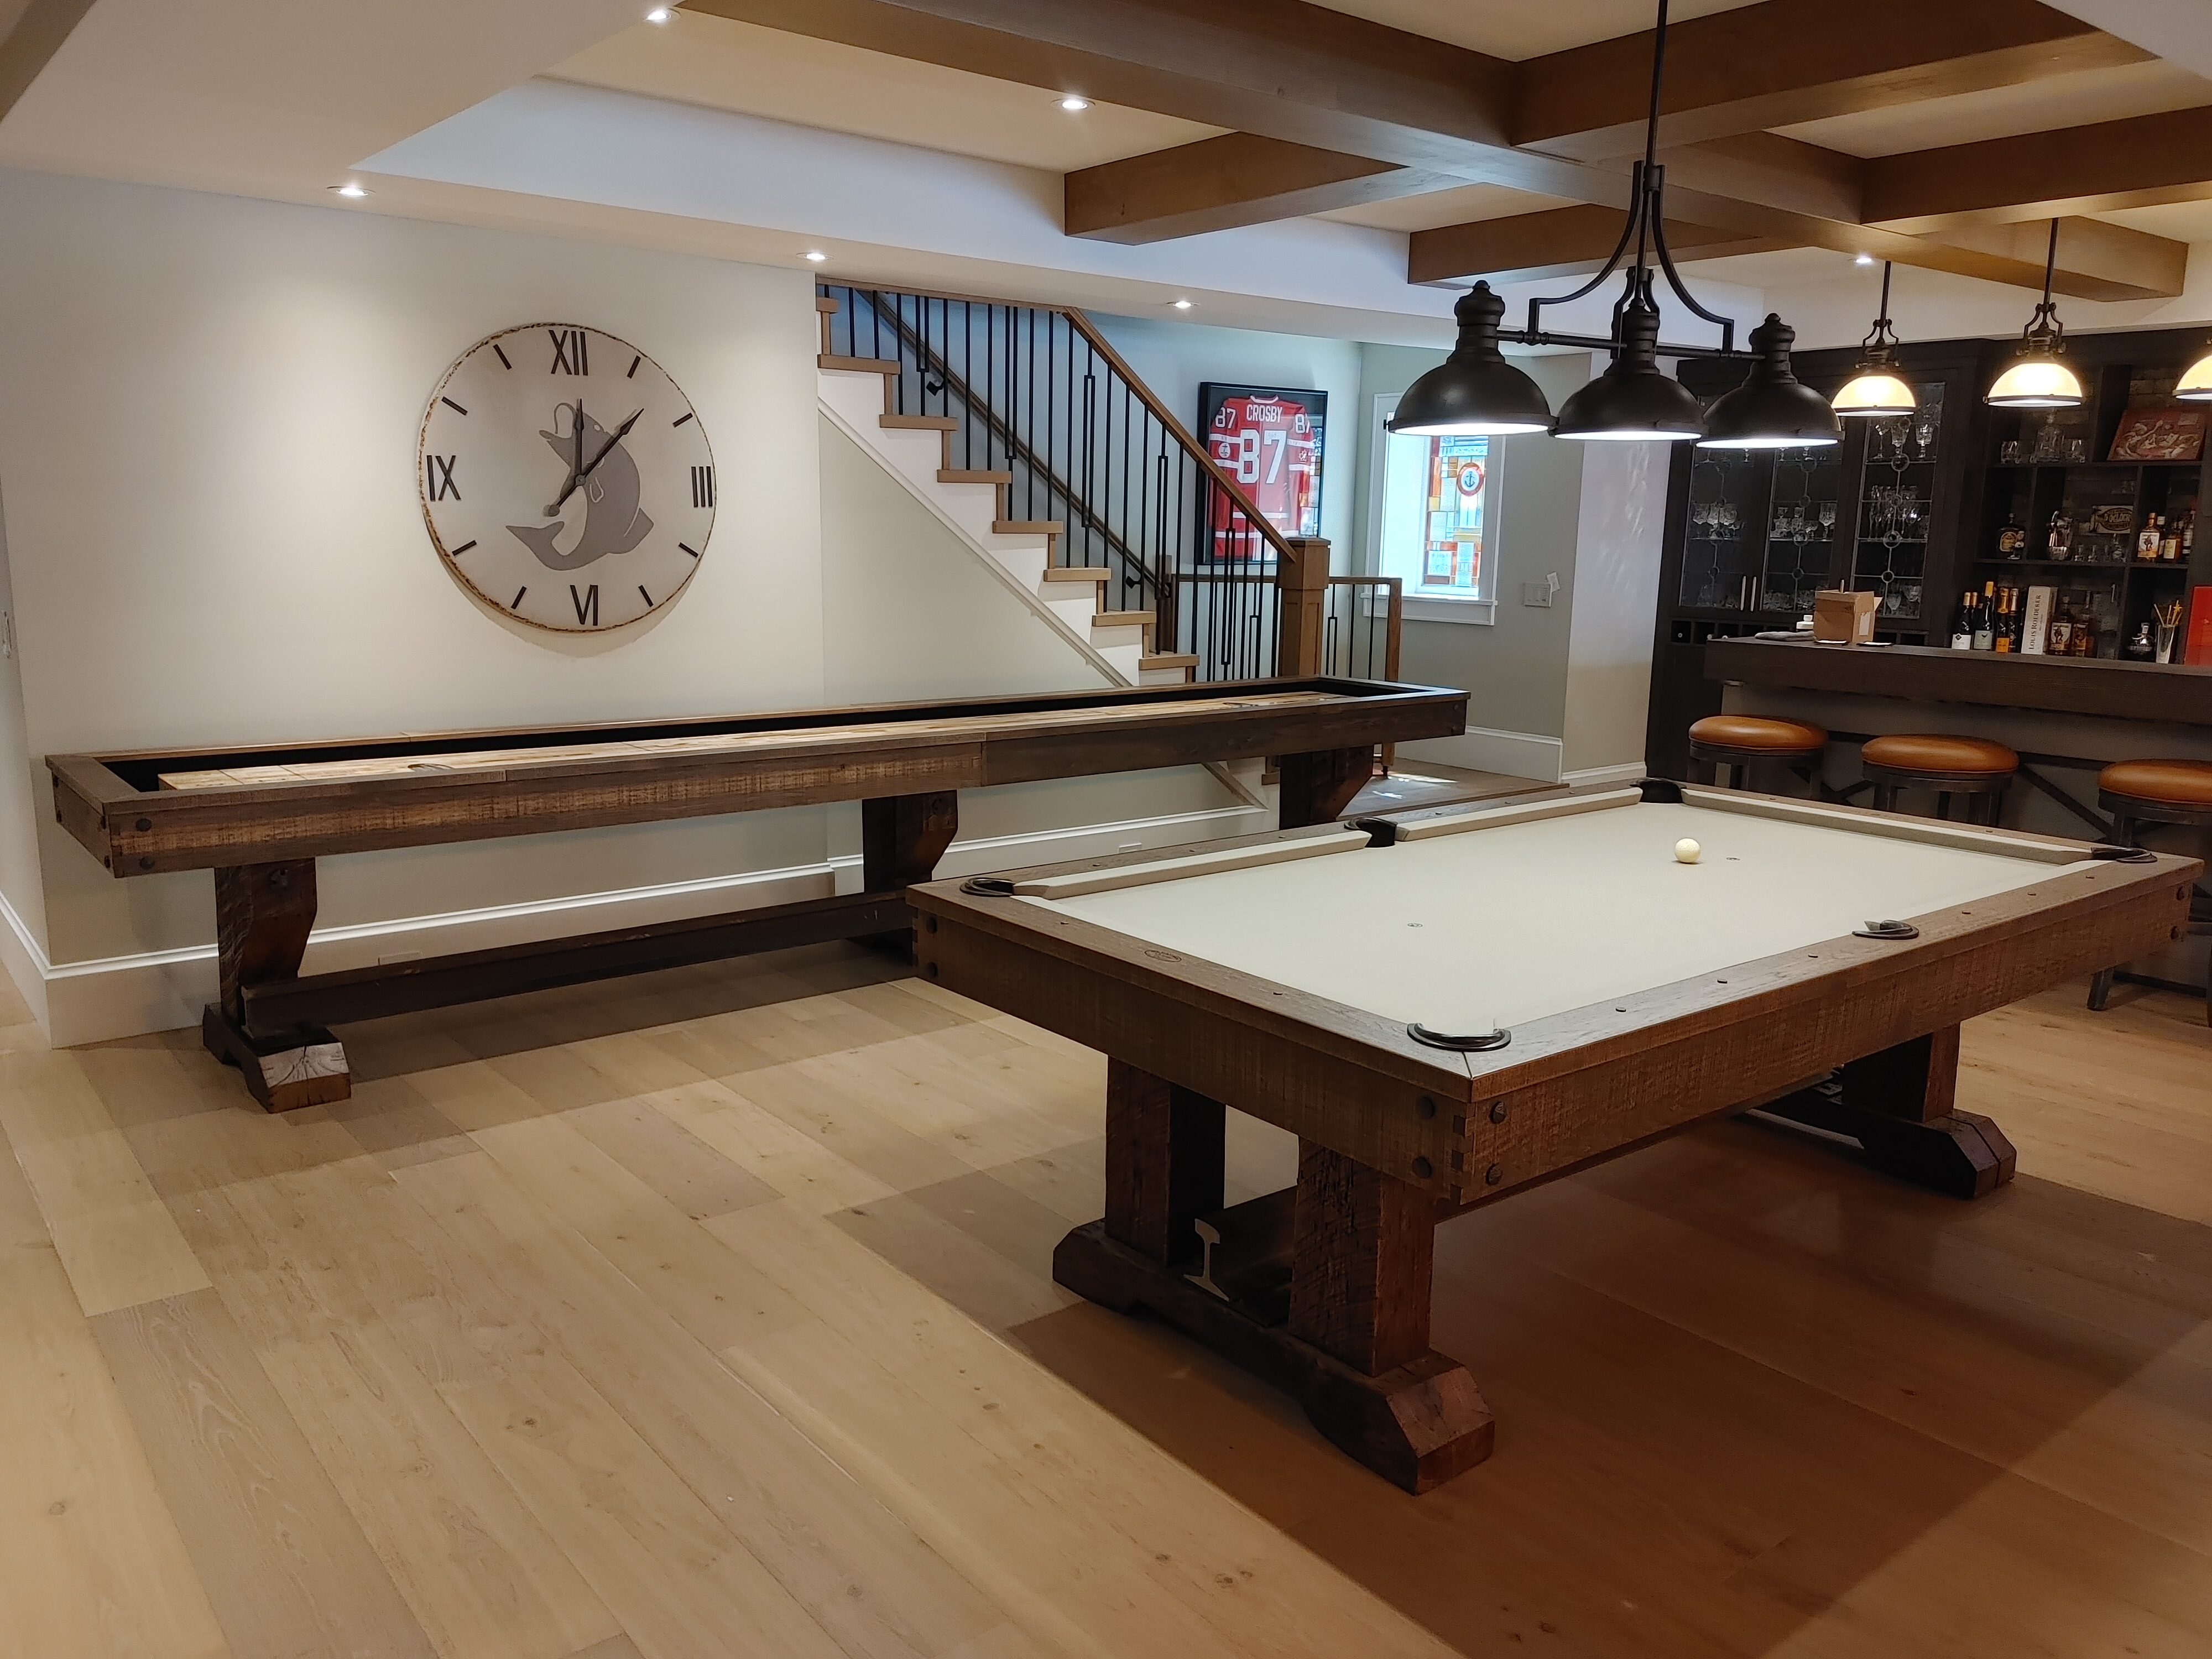 Pool table with light coloured felt in a rec room that has a shuffleboard table and bar in the background.